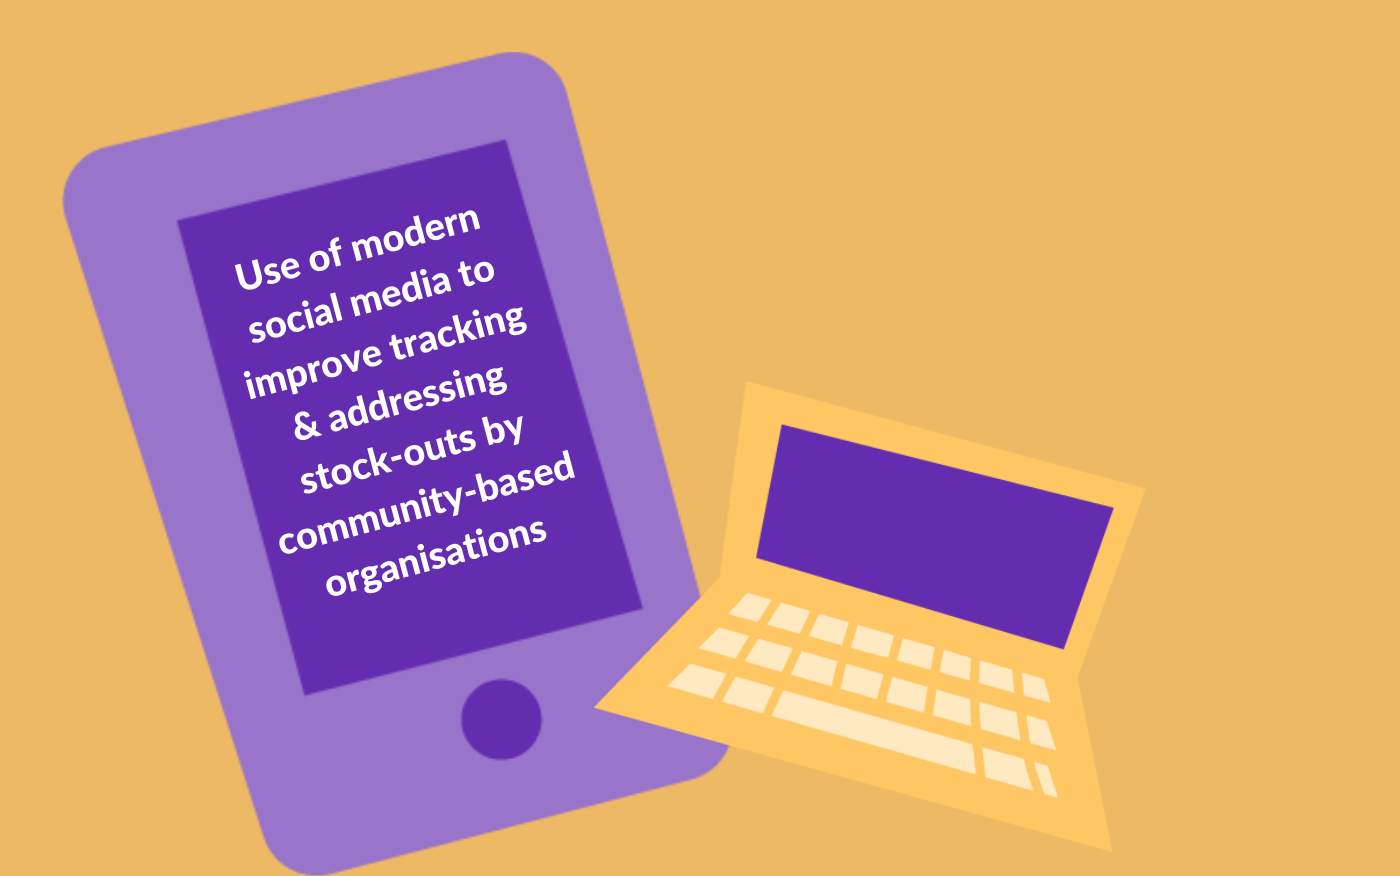 Use of modern social media to improve tracking and addressing stock-outs by community-based organisations